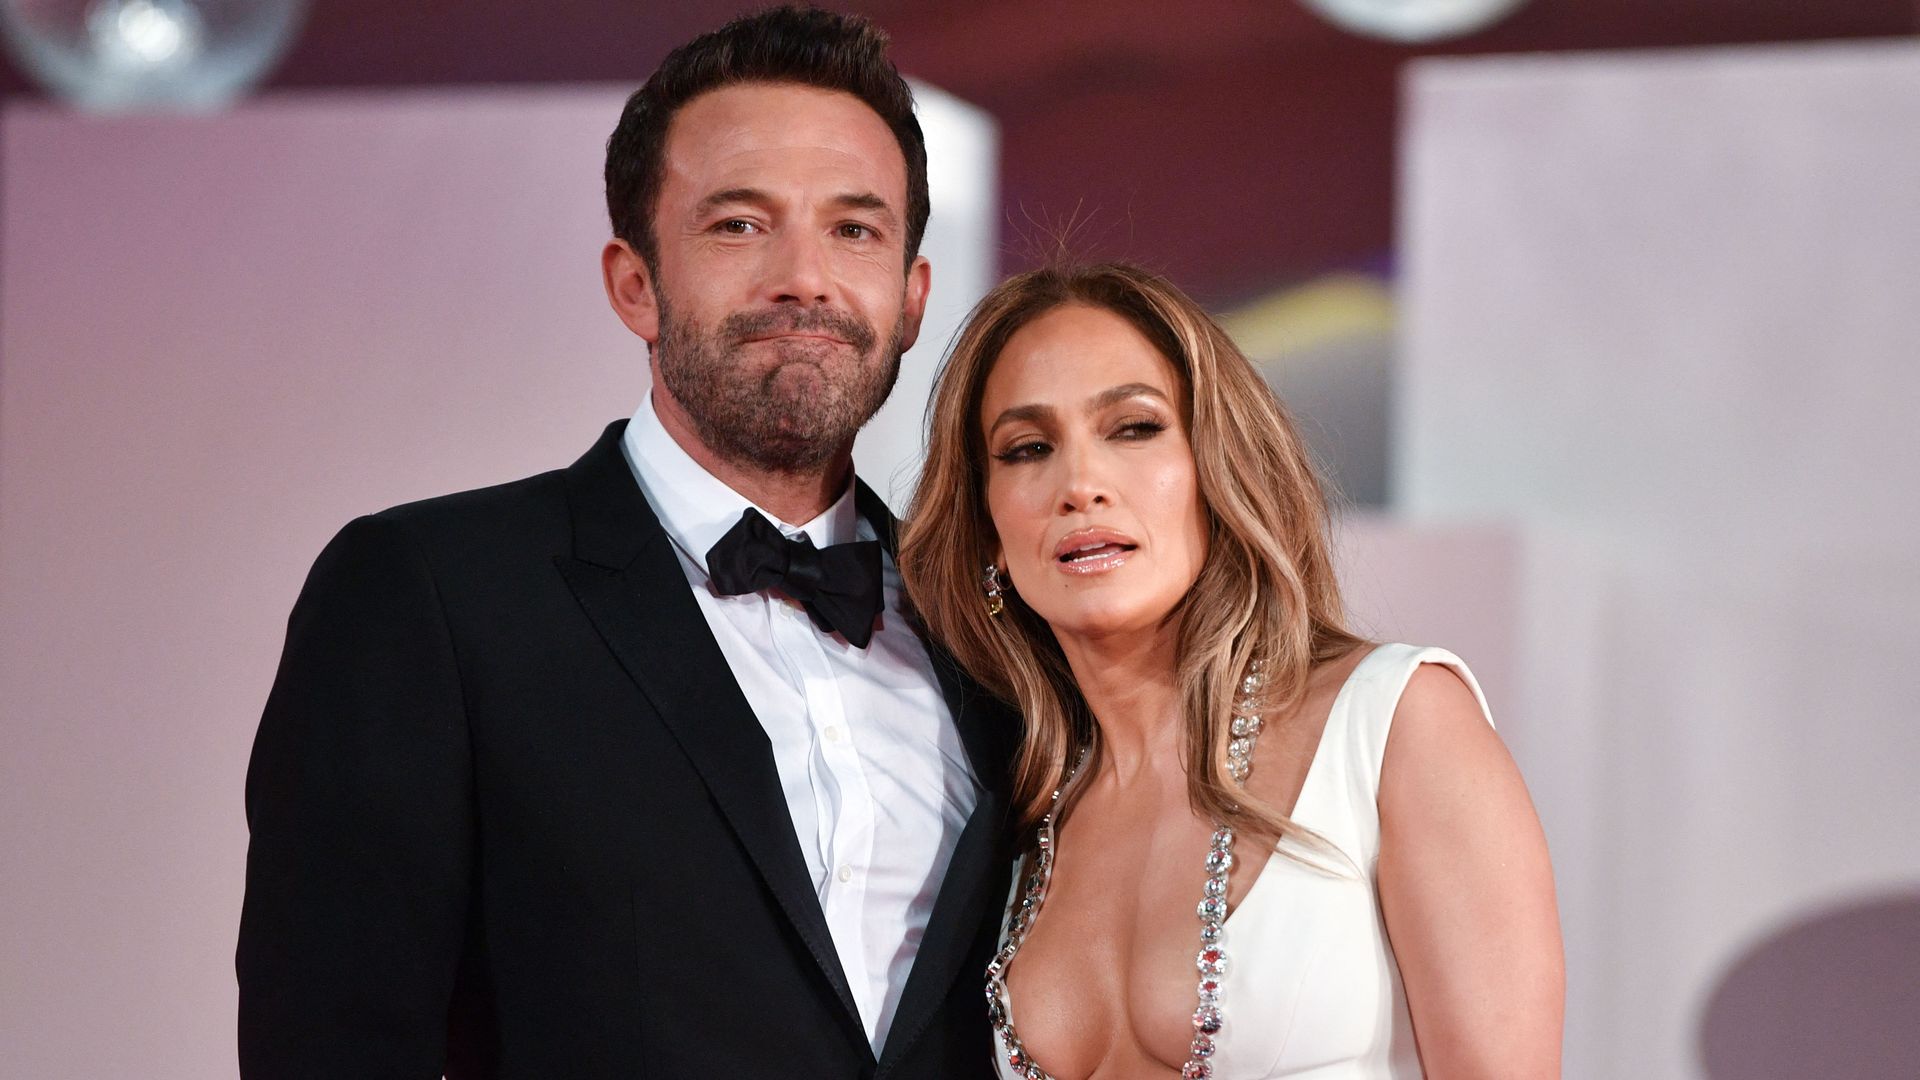 Ben Affleck admits feeling uncomfortable with the constant attention while out with Jennifer Lopez